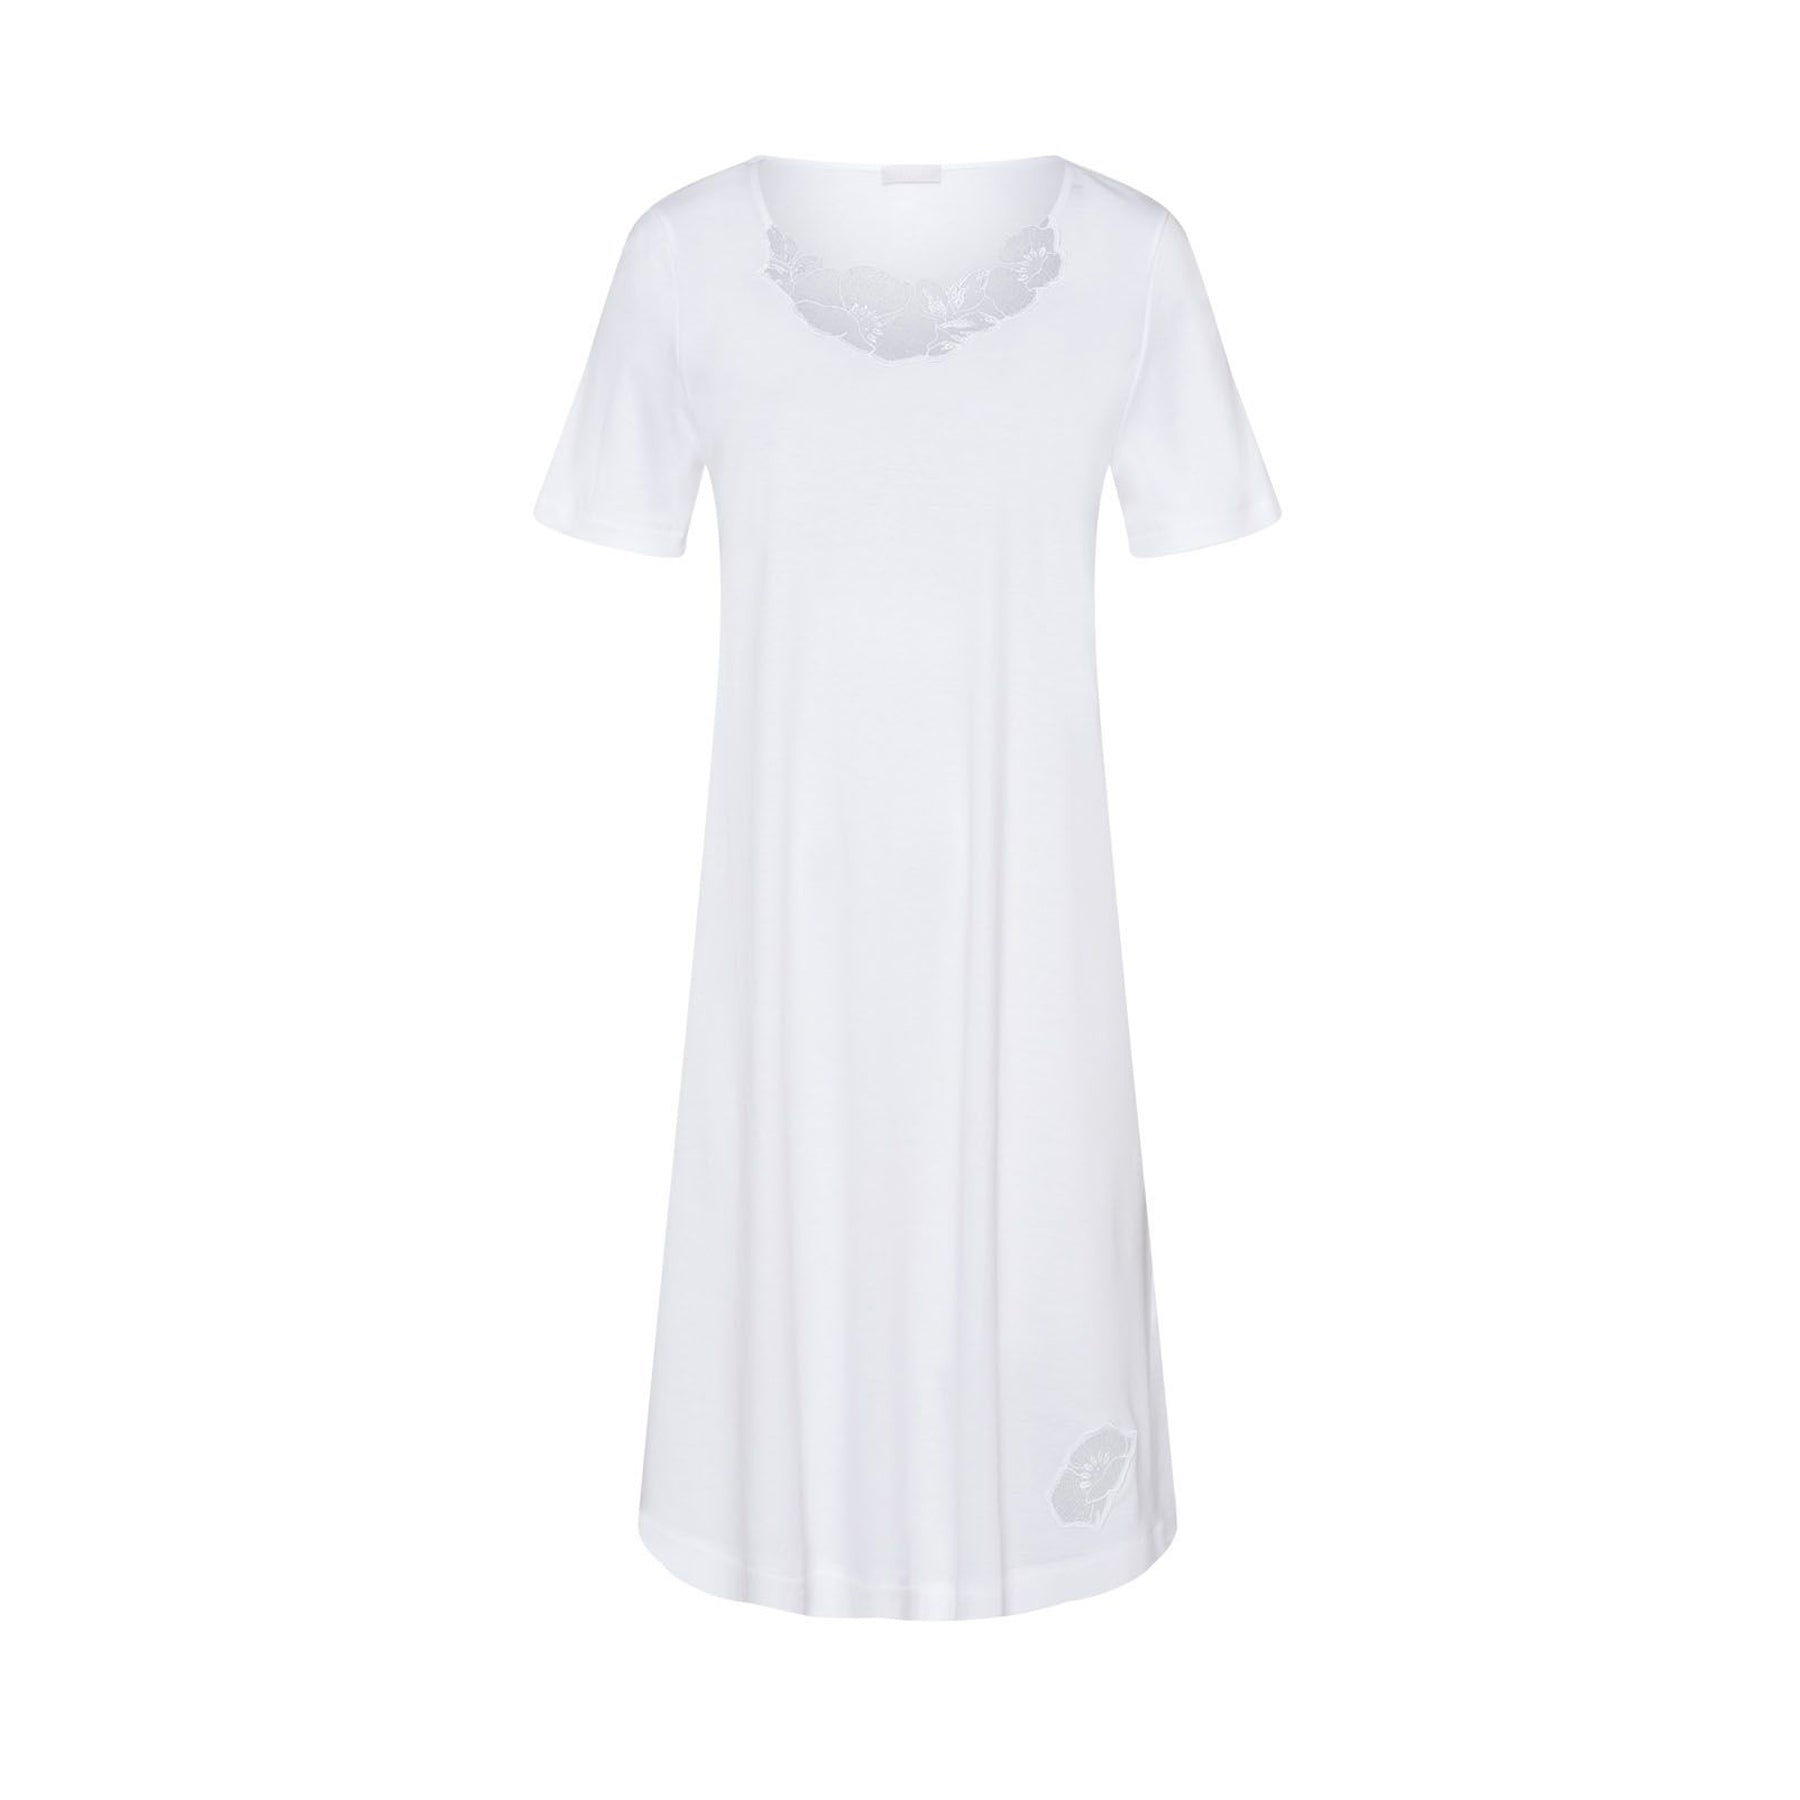 Hanro Moments Short Sleeve V-Neck Lace Trim Gown